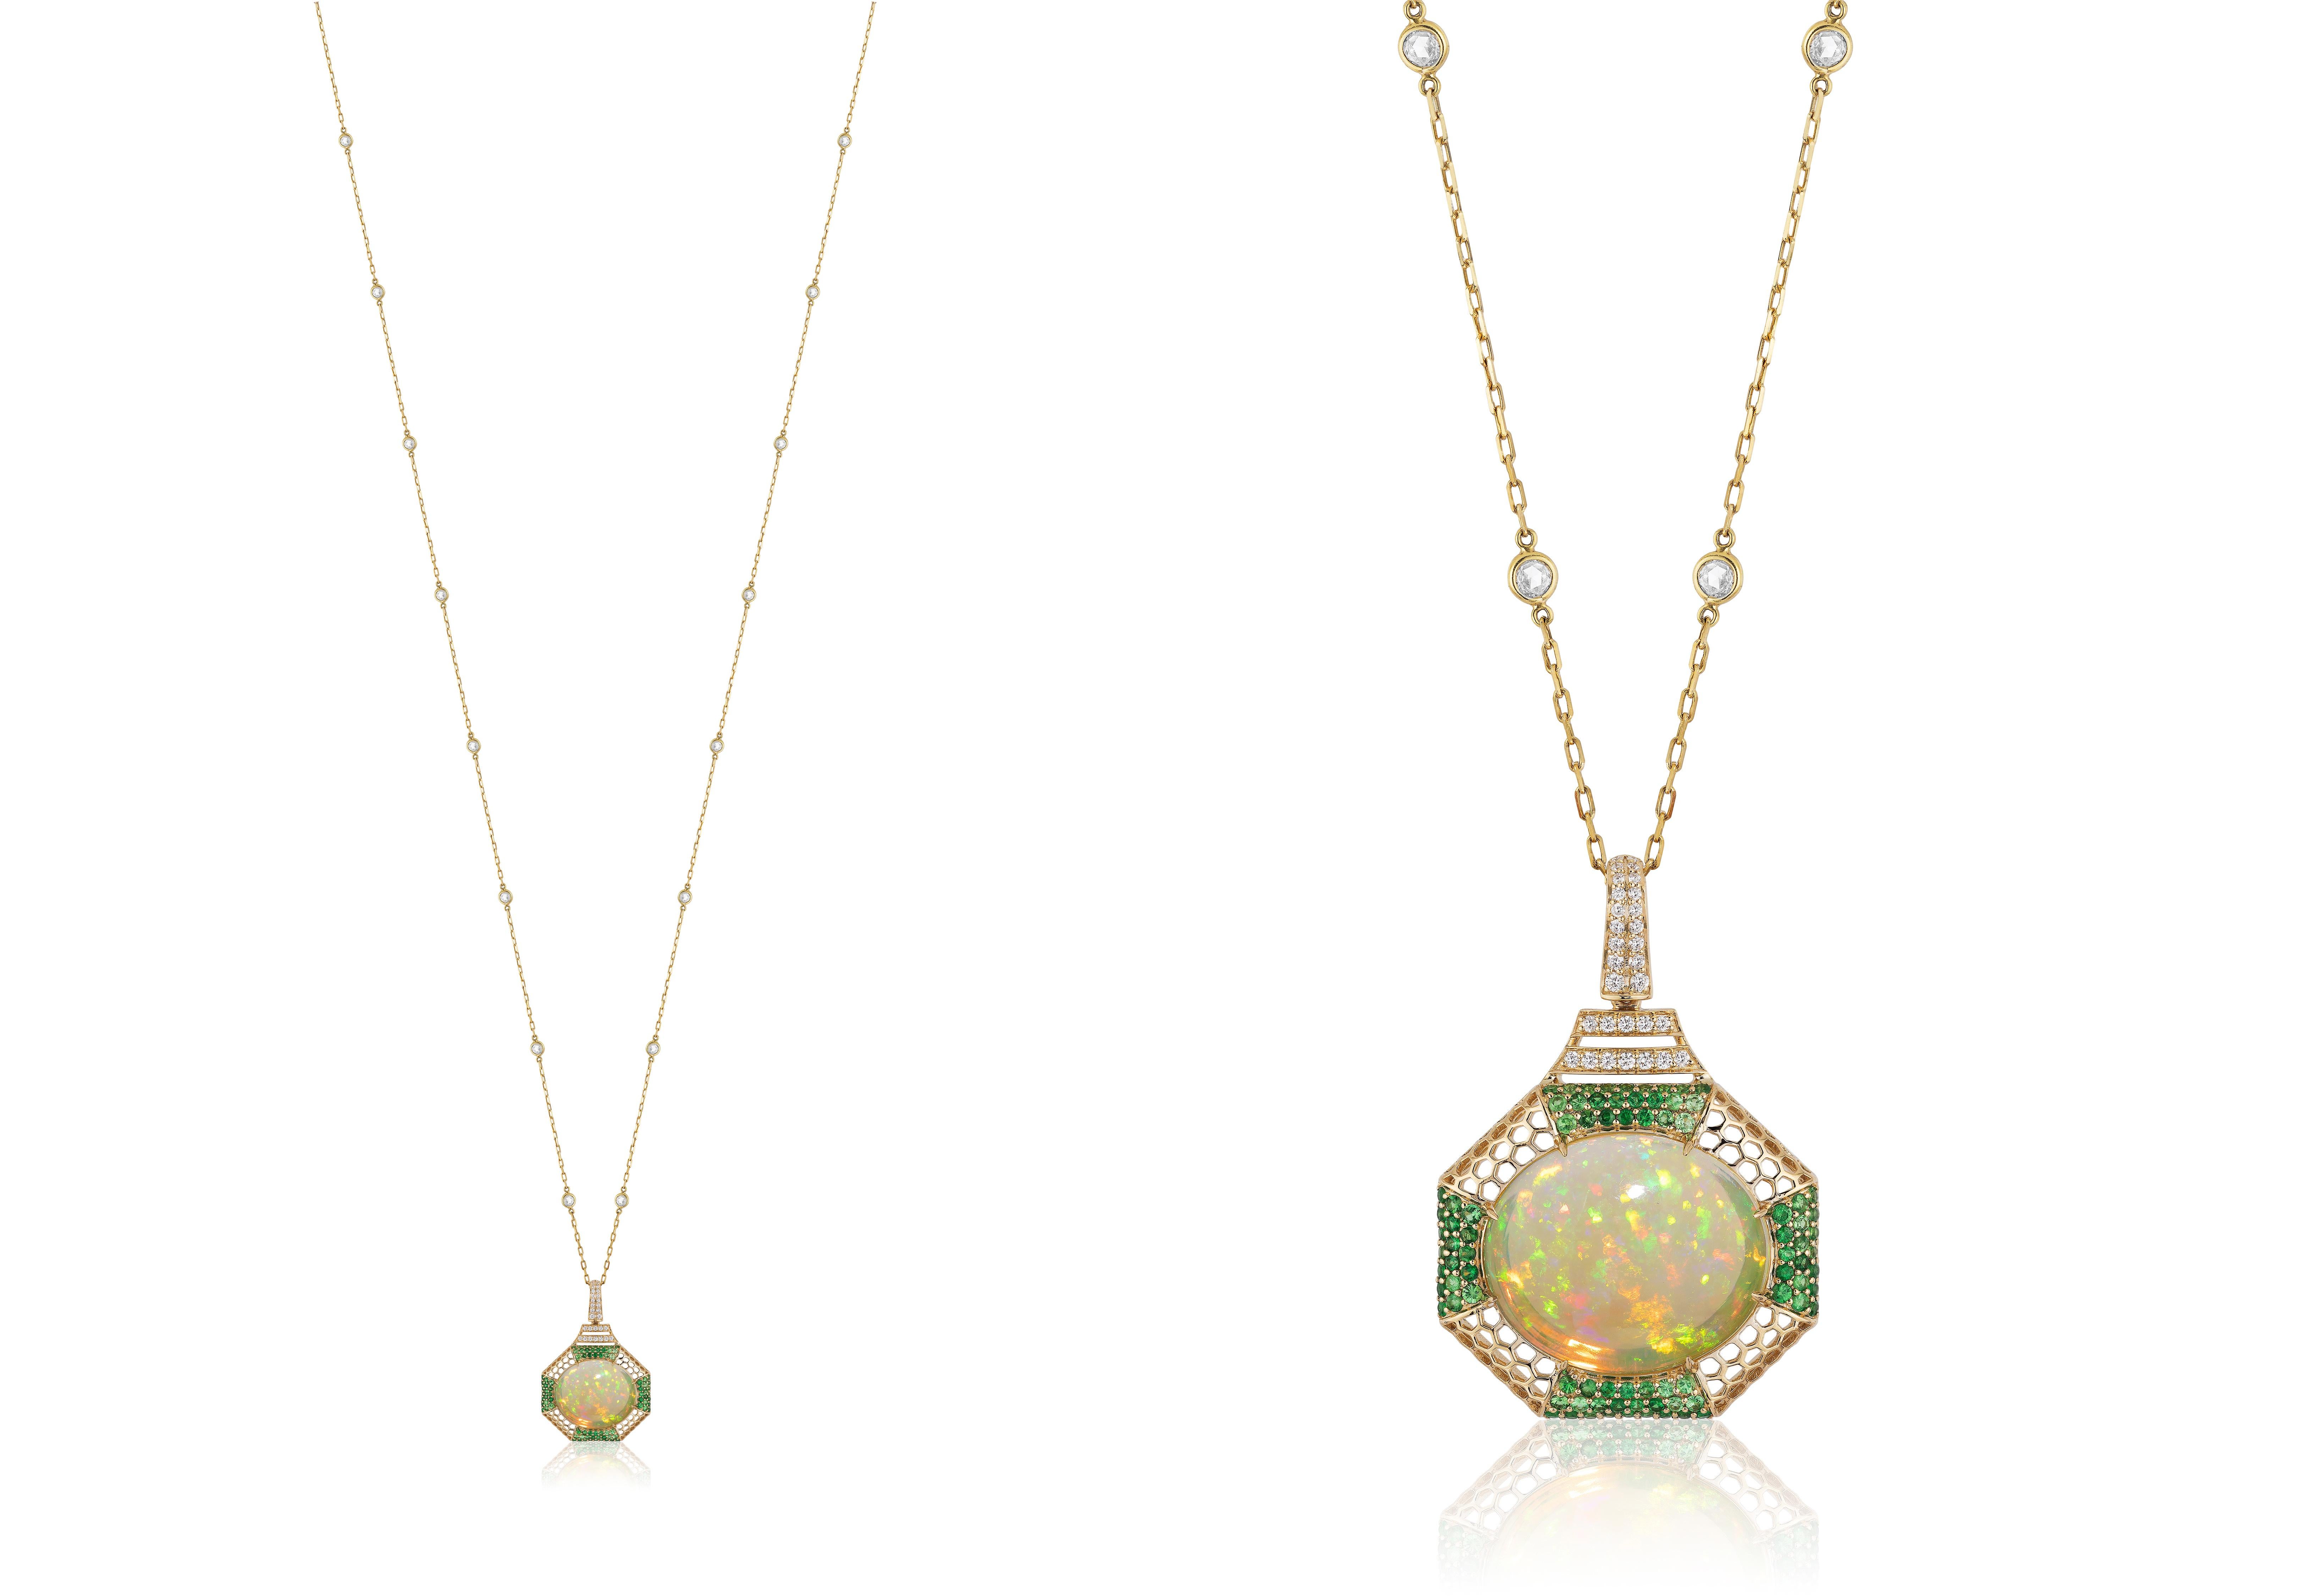 Large Opal Pendant With Diamond & Tsavorites In 18K Yellow Gold, from 'G-One' Collection

Stone Size: 23 x 19 mm

Gemstone Weight: 17.03 Carats

Diamond: G-H / VS, Approx Wt: 0.3 Carats

*Chain Sold Separately
